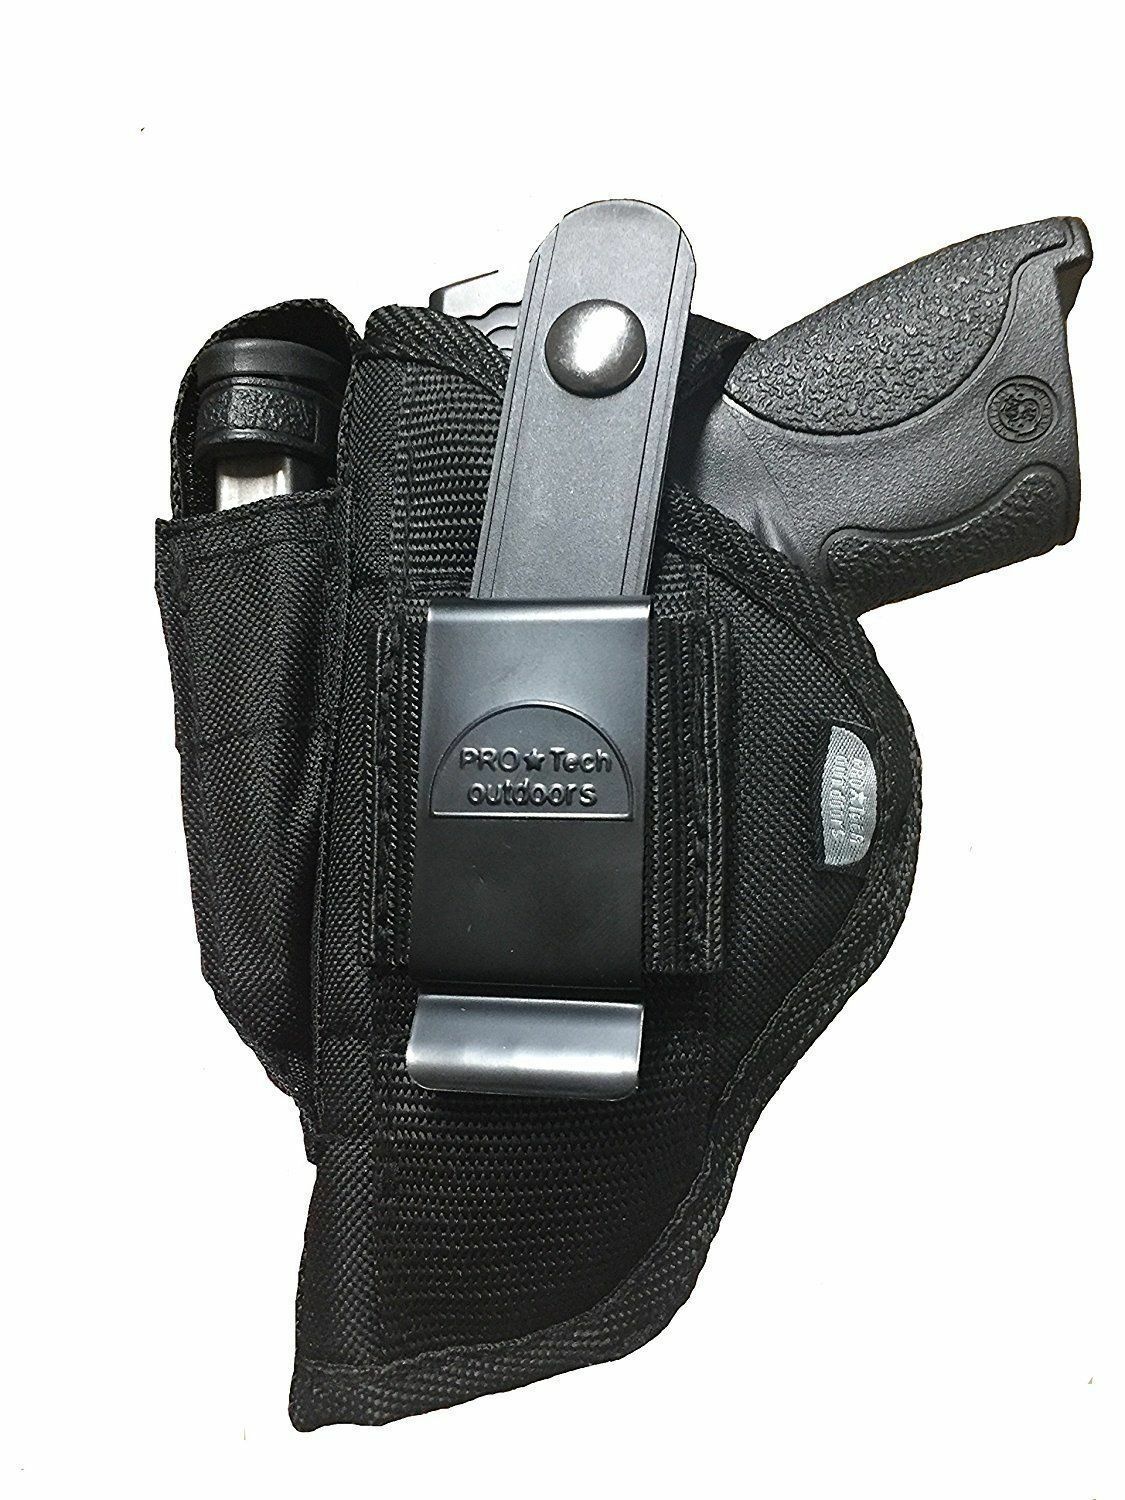 Gun Holster with built in Mag holder For SpringField XD9 XD40,XD45 - $24.95